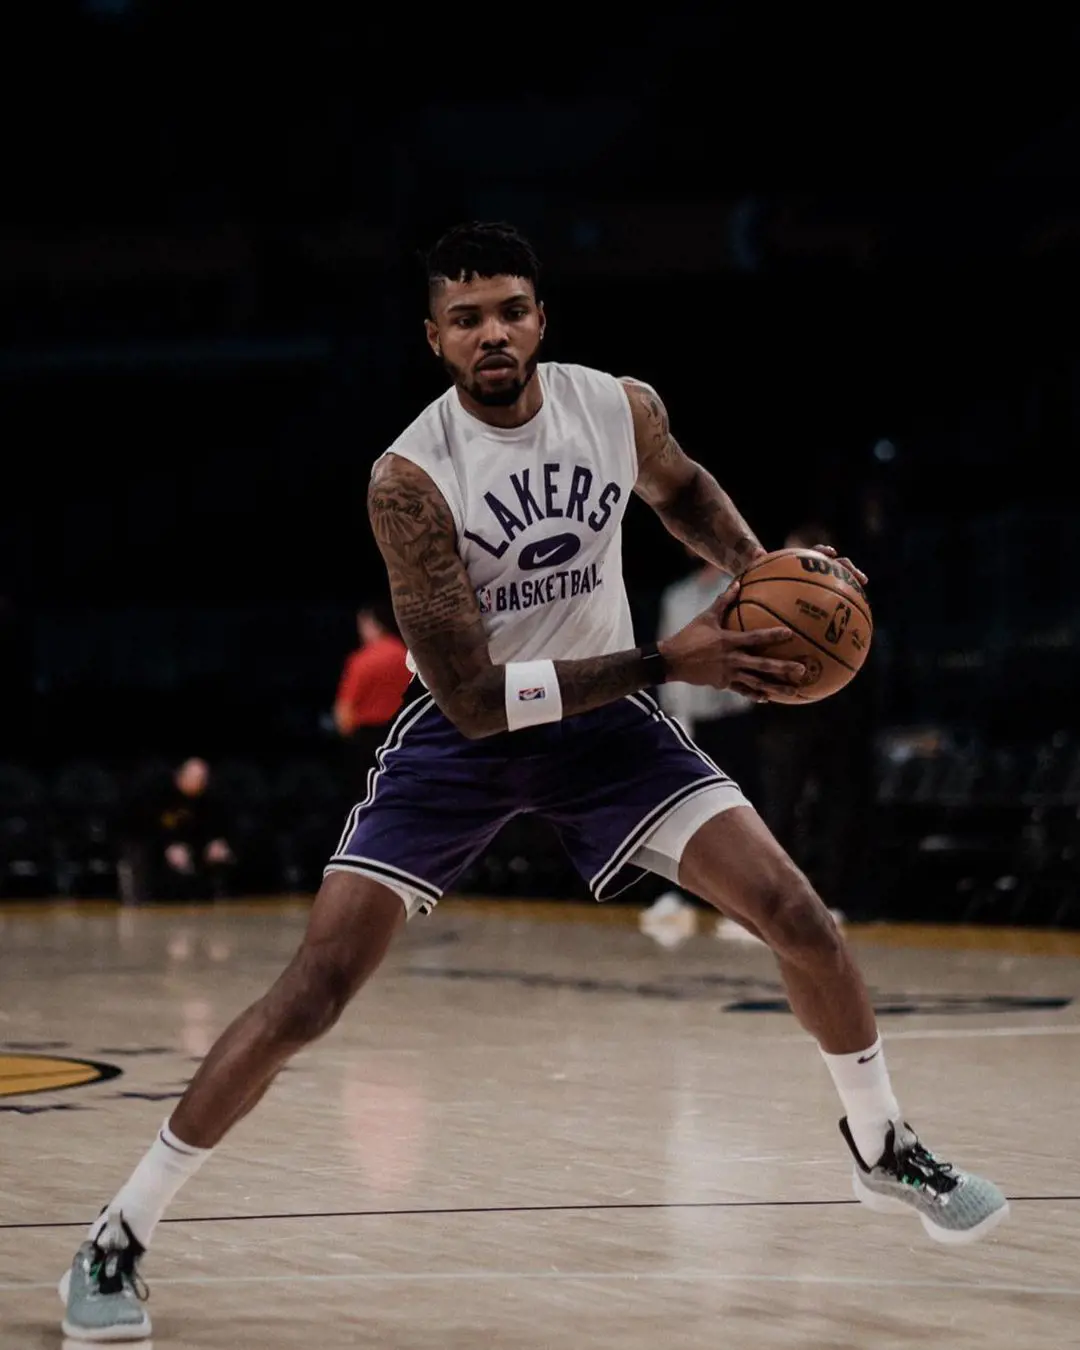 Bazemore preparing for 7 foot target while playing a match for Lakers in February 2022